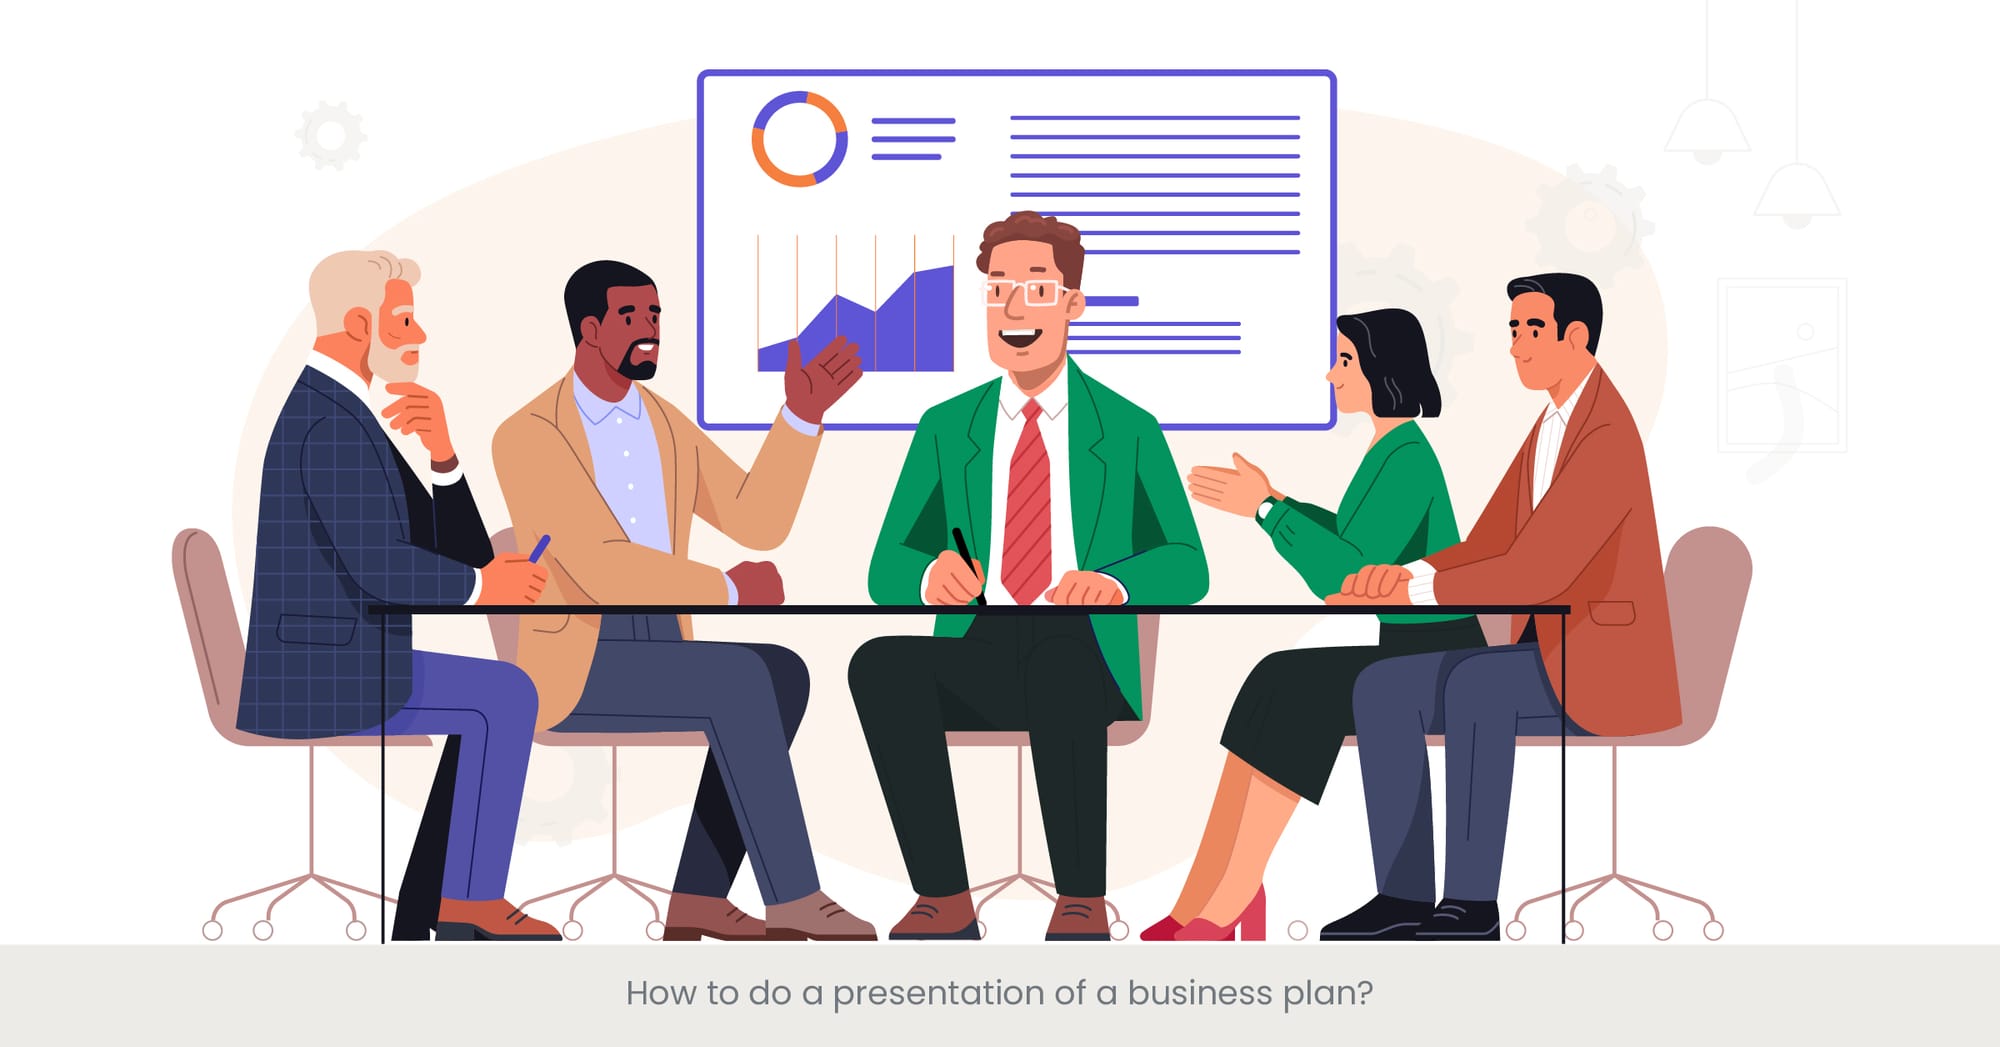 How to do a presentation of a business plan